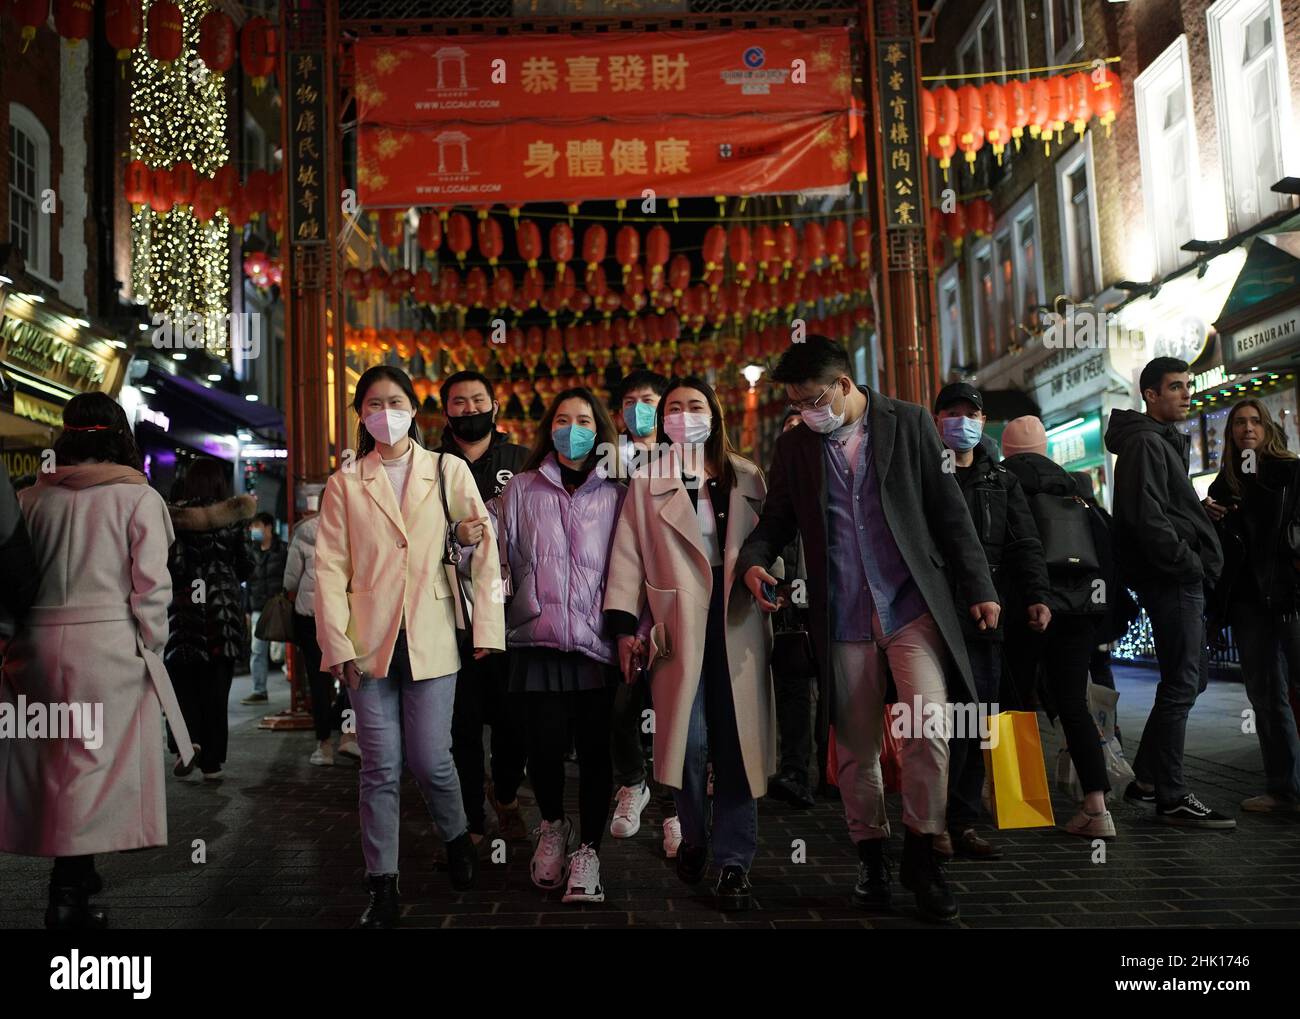 People in Chinatown, London, celebrating the Lunar New Year. The Lunar New Year - beginning on February 1 - is the start of a two-week celebration and is the most important holiday for millions of people around the world. Picture date: Tuesday February 1, 2022. Stock Photo